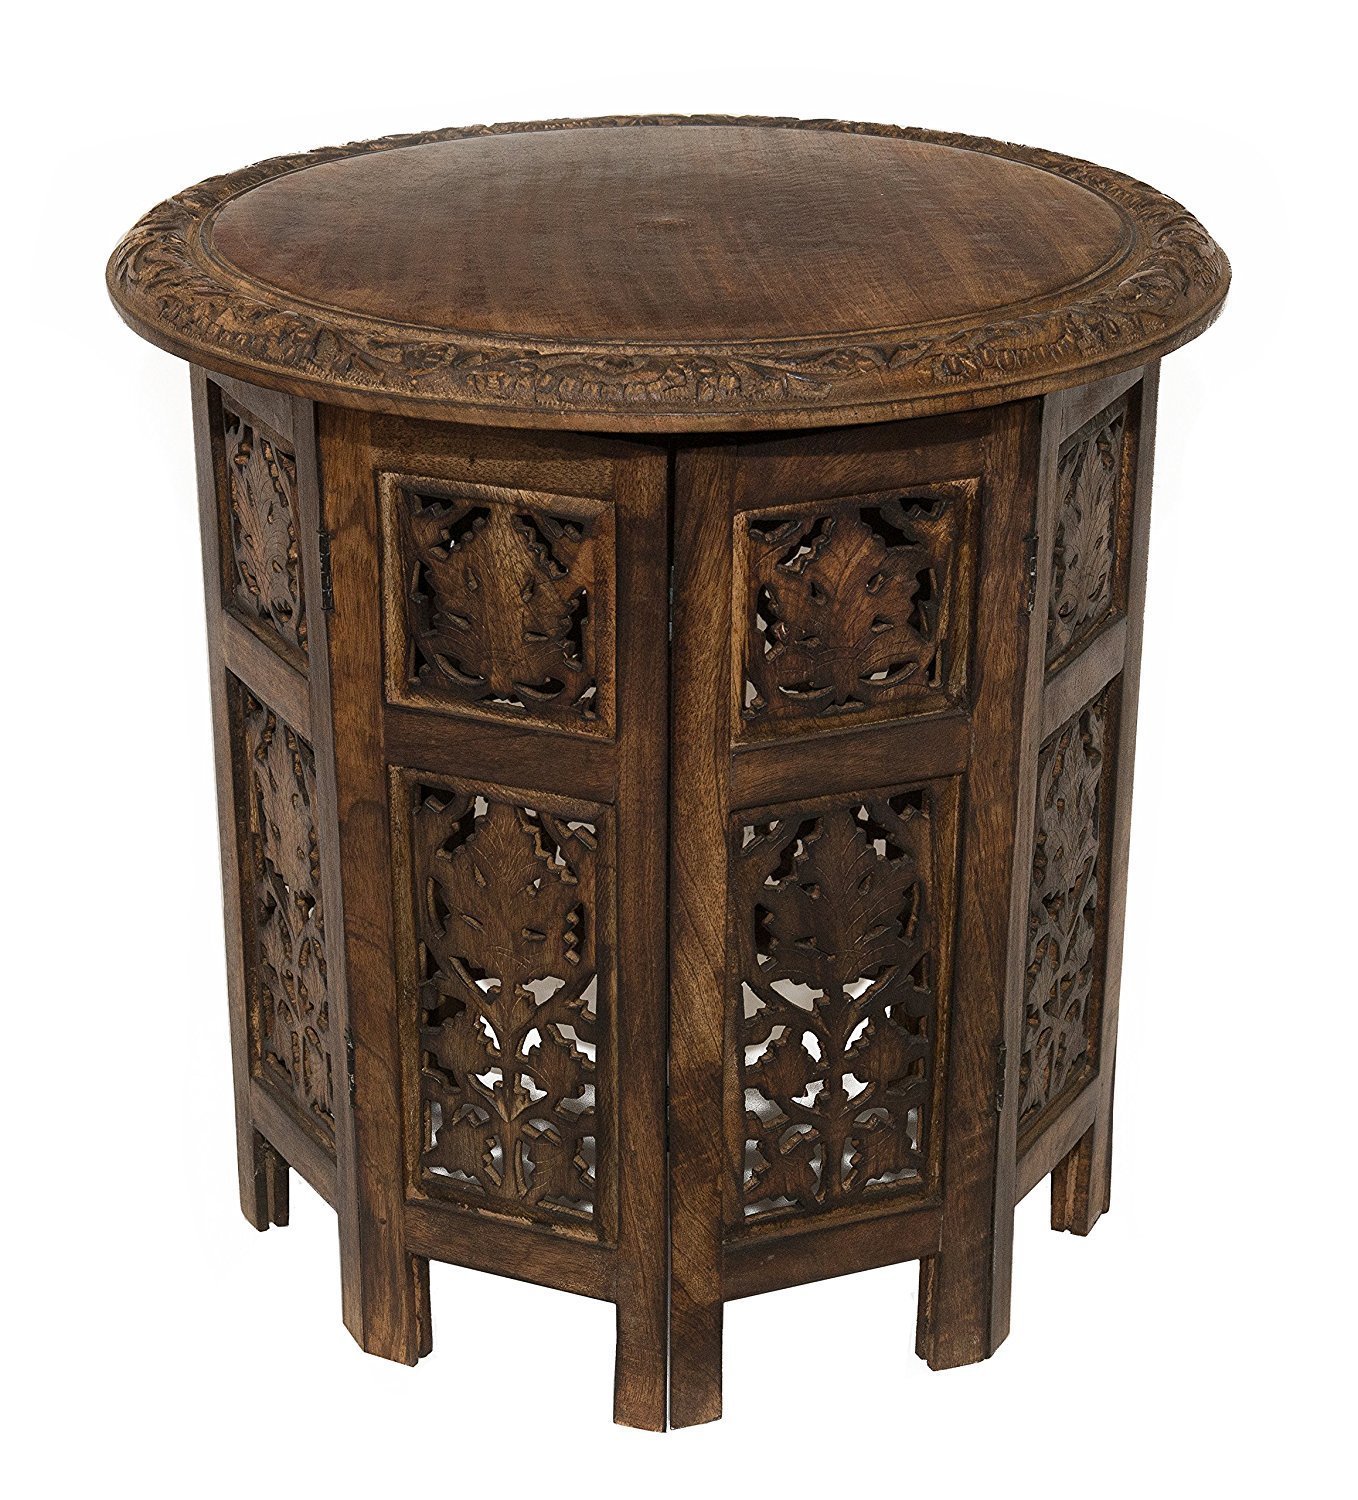 artesia solid wood hand carved rajasthan folding accent sheesham table coffee inch round top high brown kitchen dining small floor cabinet gold center victorian furniture bayside